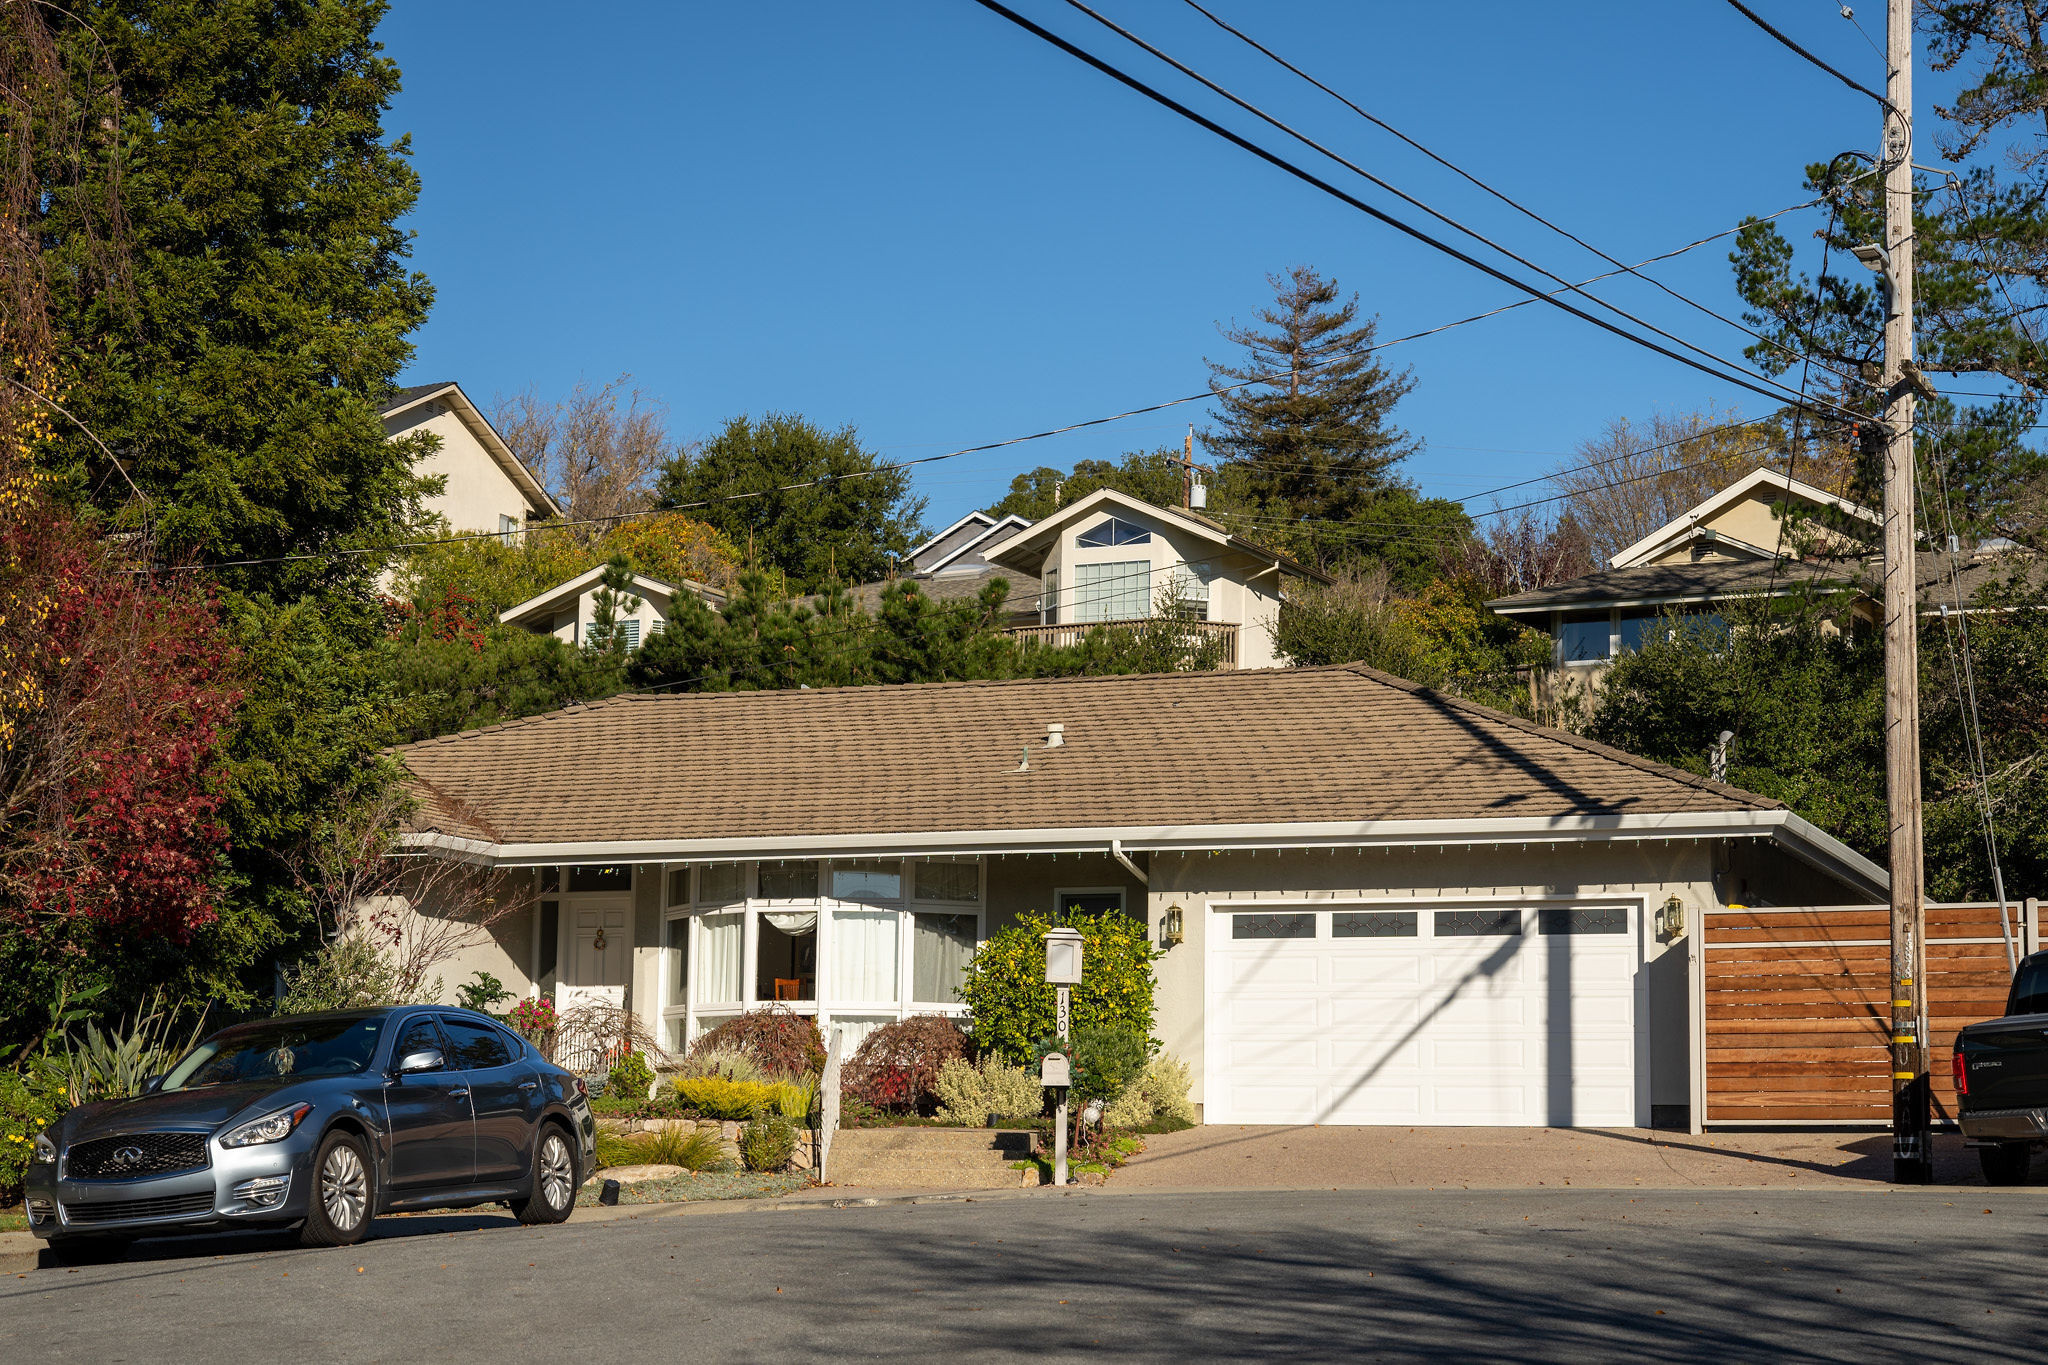 Baywood Park/Enchanted Hills Ranch style house with a white garage door in San Mateo.